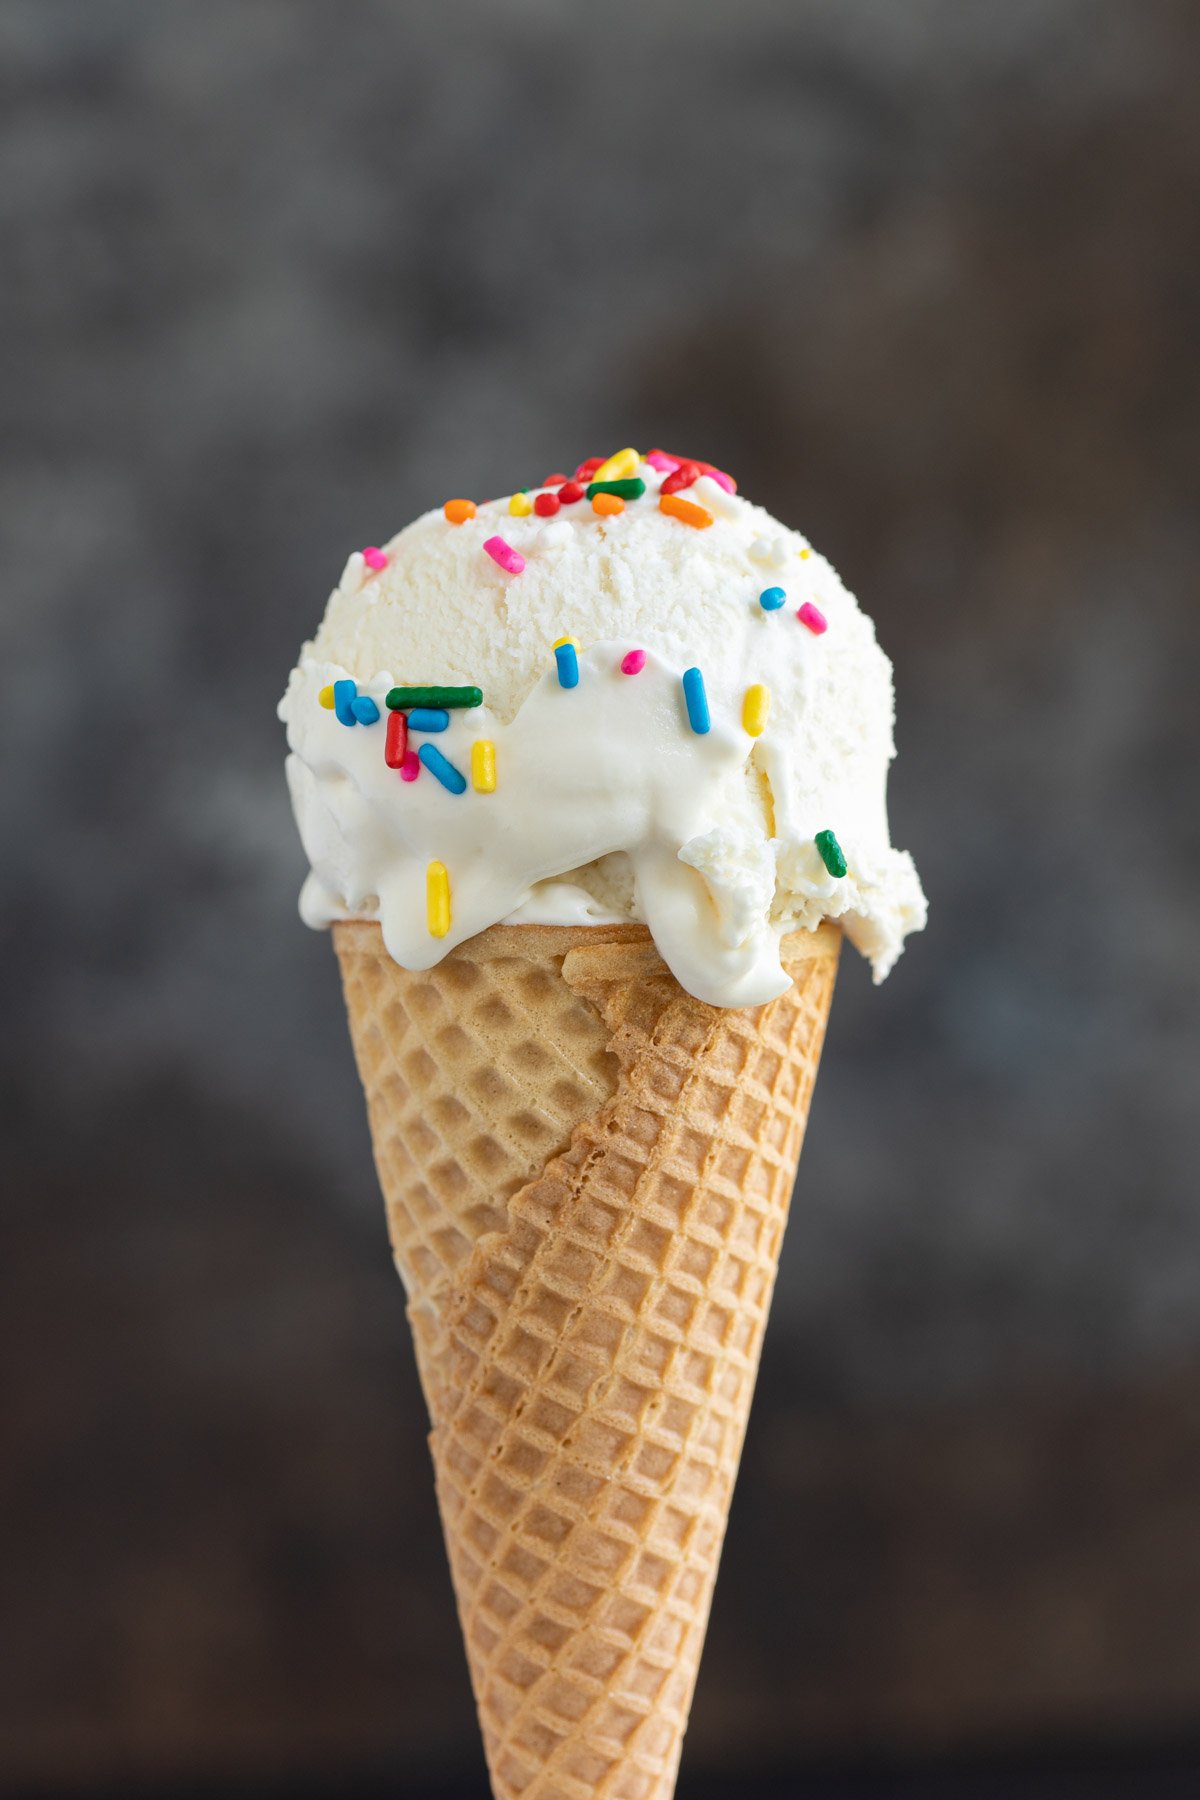 A closeup of a vanilla ice cream cone with sprinkles.